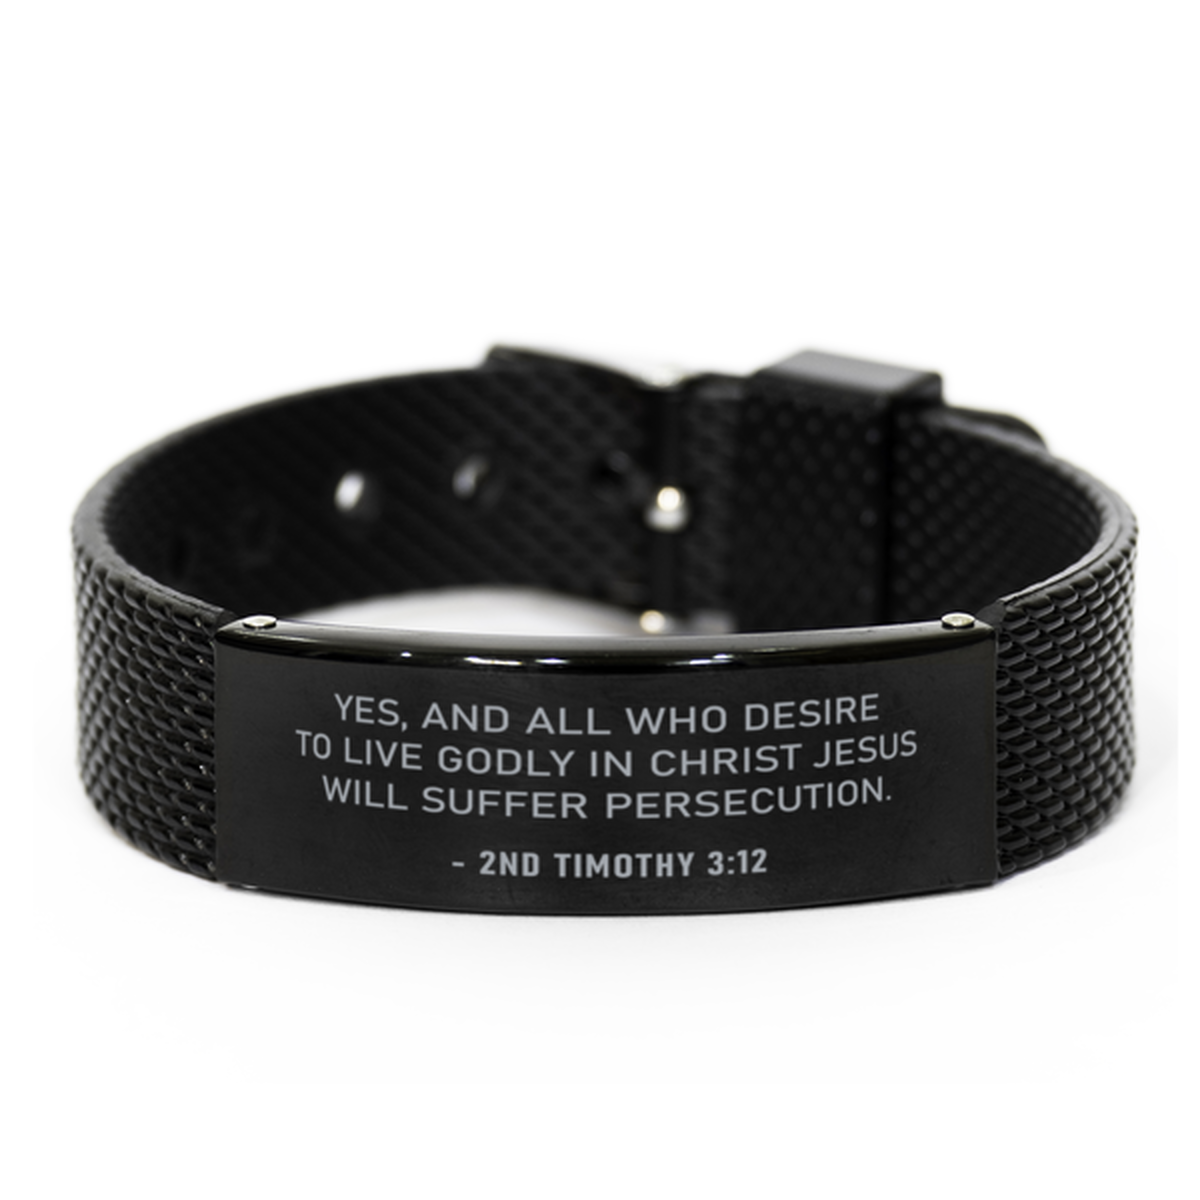 Christian Black Bracelet,, 2Nd Timothy 3:12 Yes, And All Who Desire To Live Godly In Christ, Motivational Bible Verse Gifts For Men Women